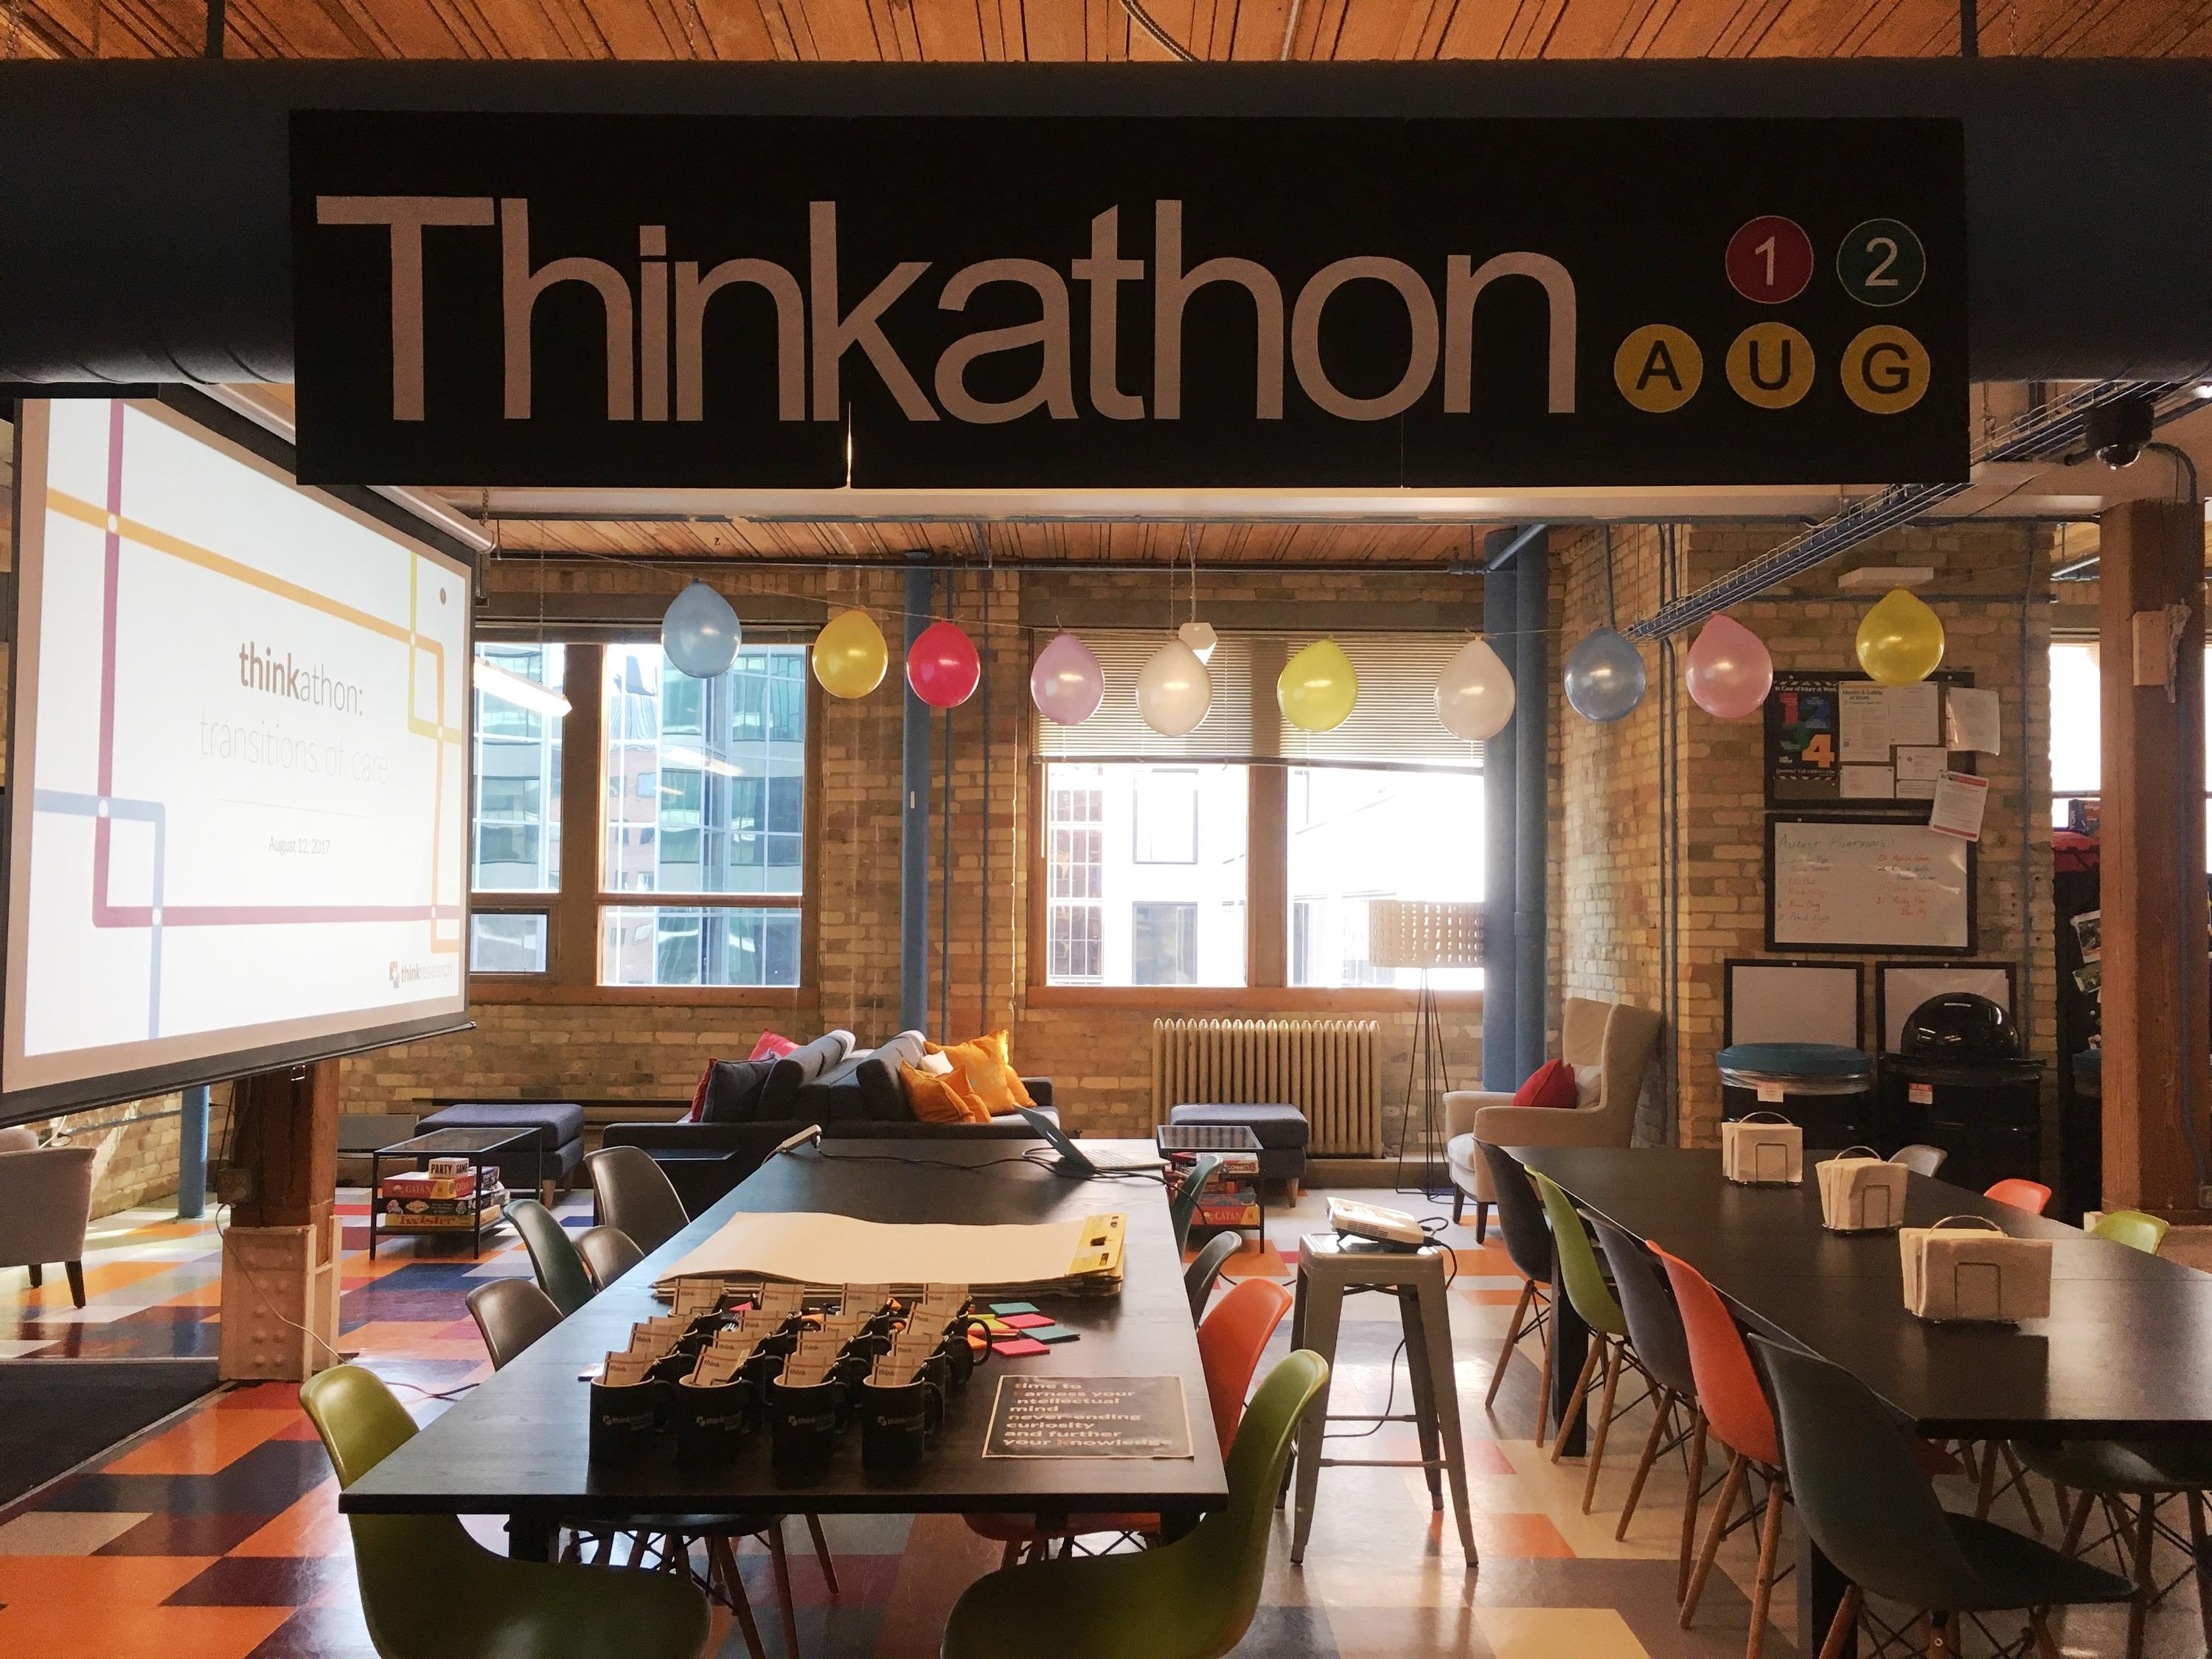 Think Research office set up for Thinkathon event